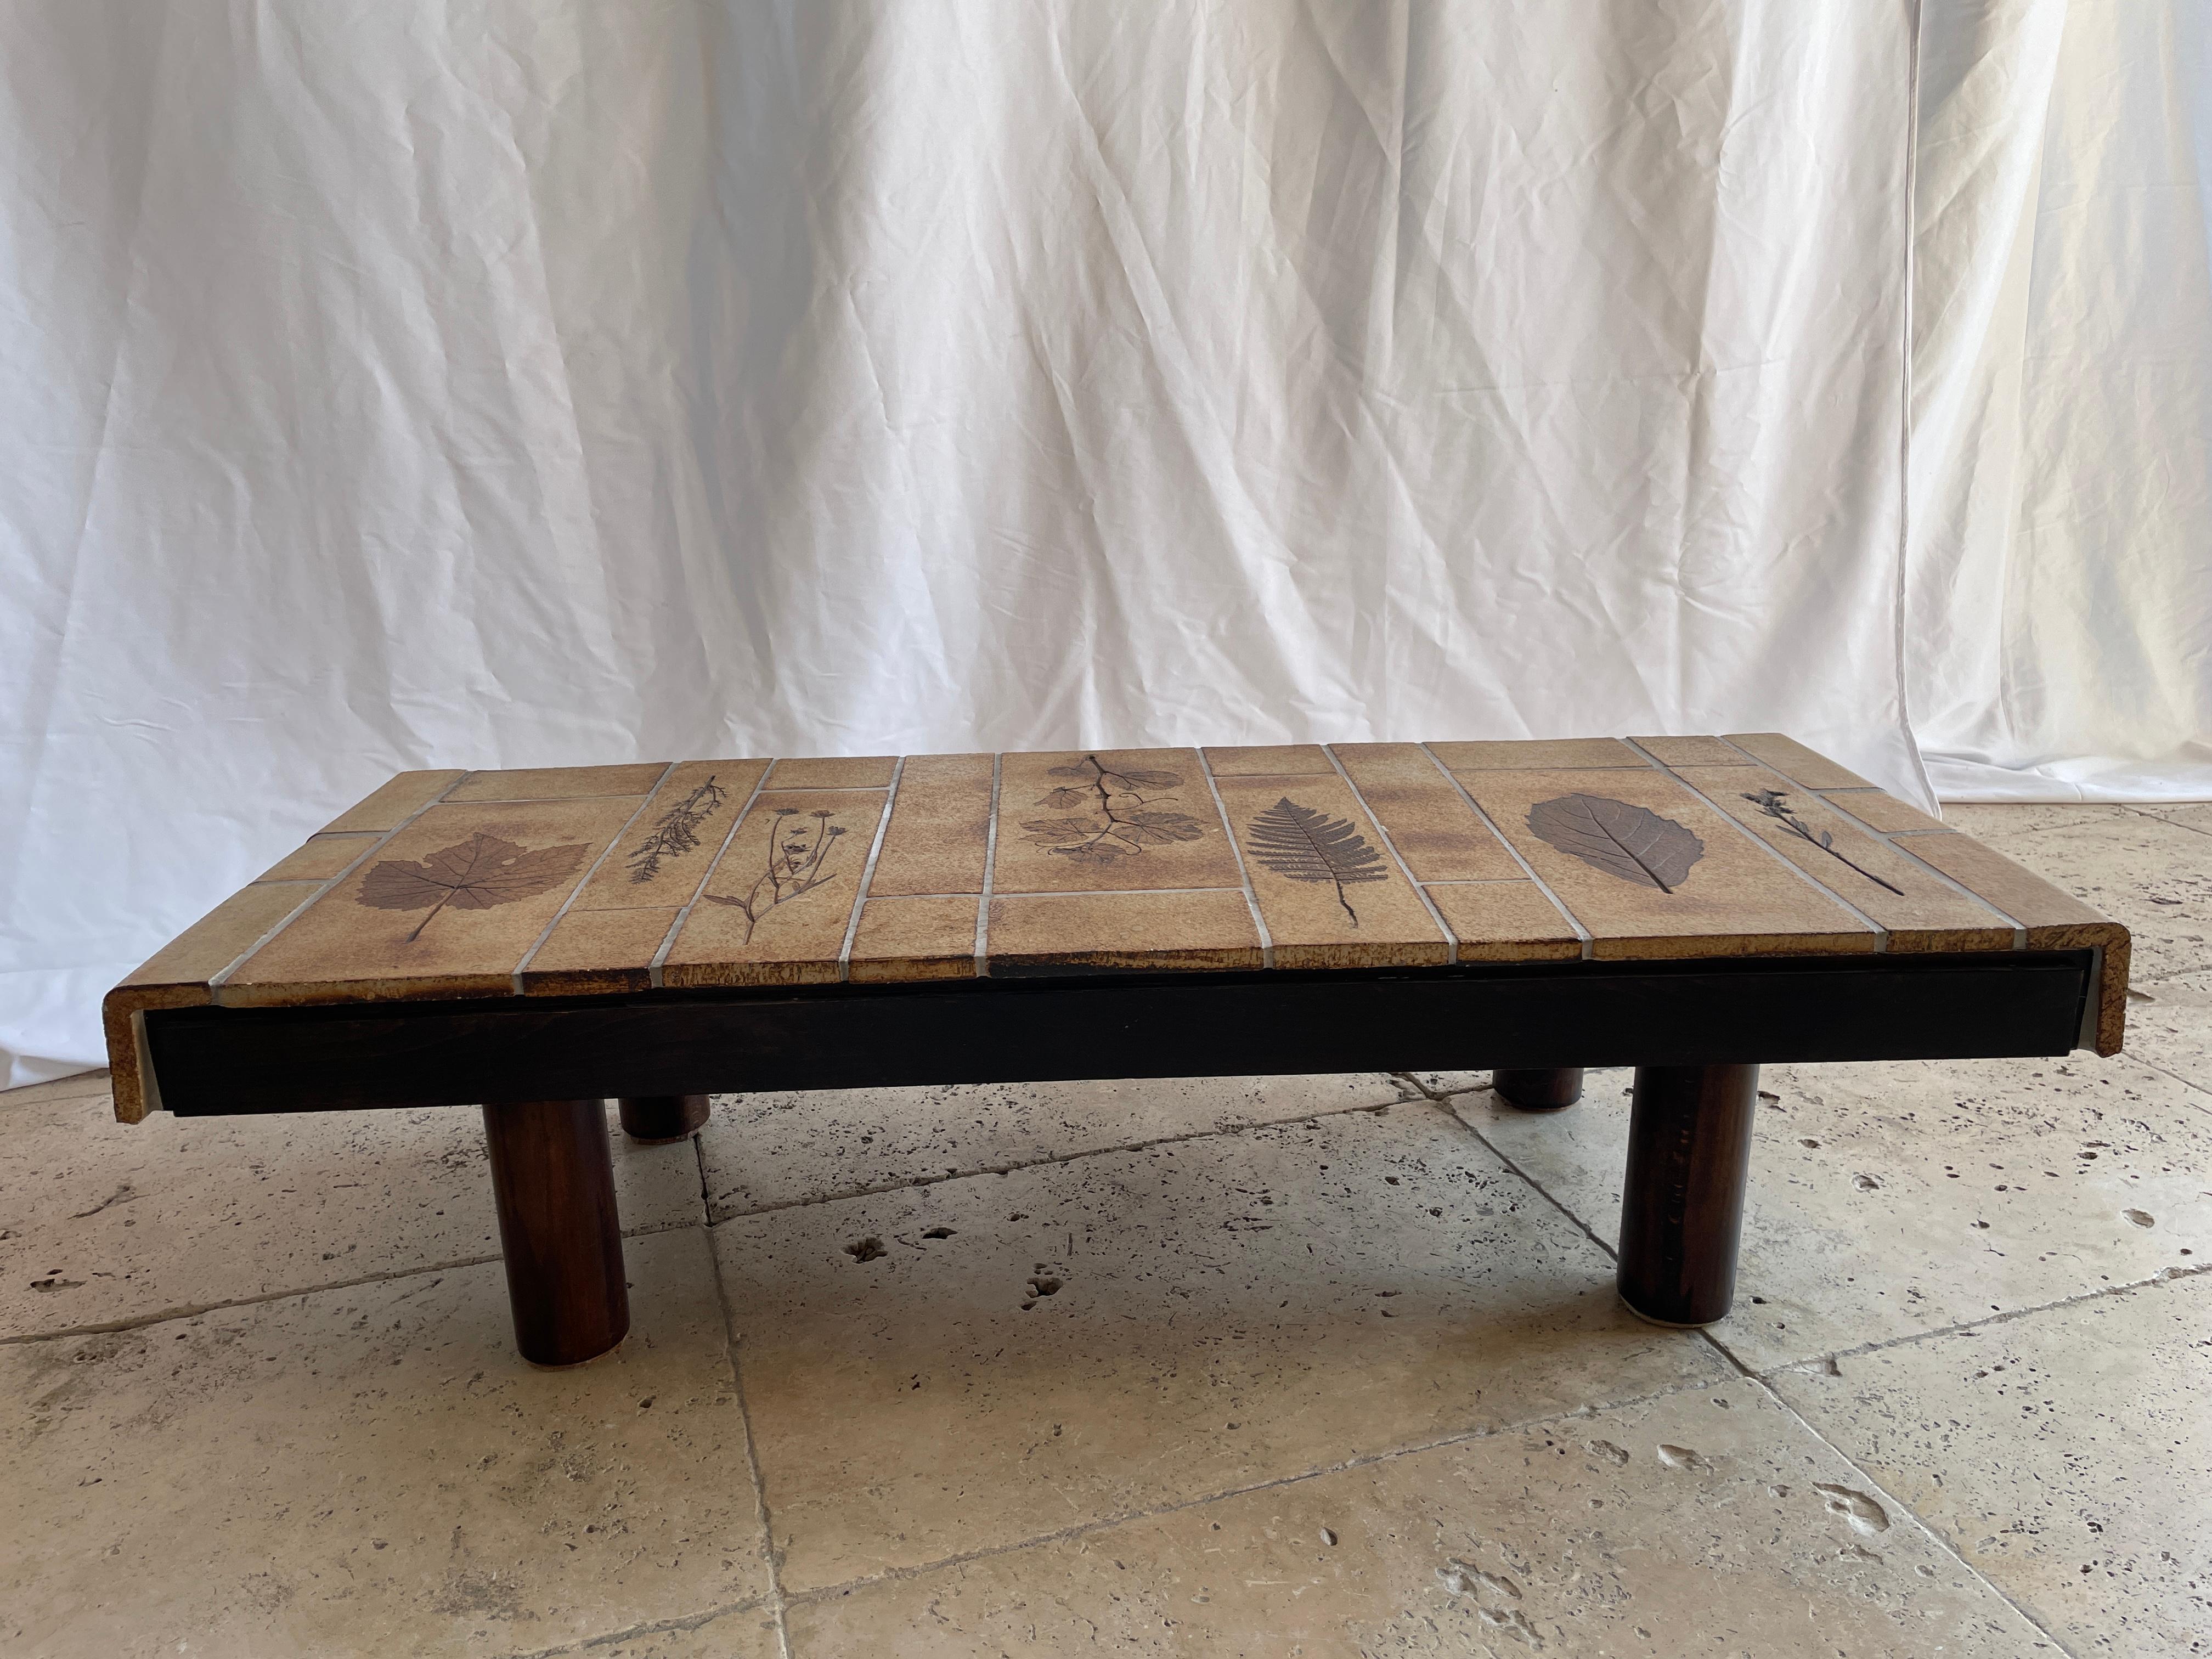 Mid-Century Modern Rectangular Coffee Table in Ceramic Tiles by Roger Capron, France, circa 1970